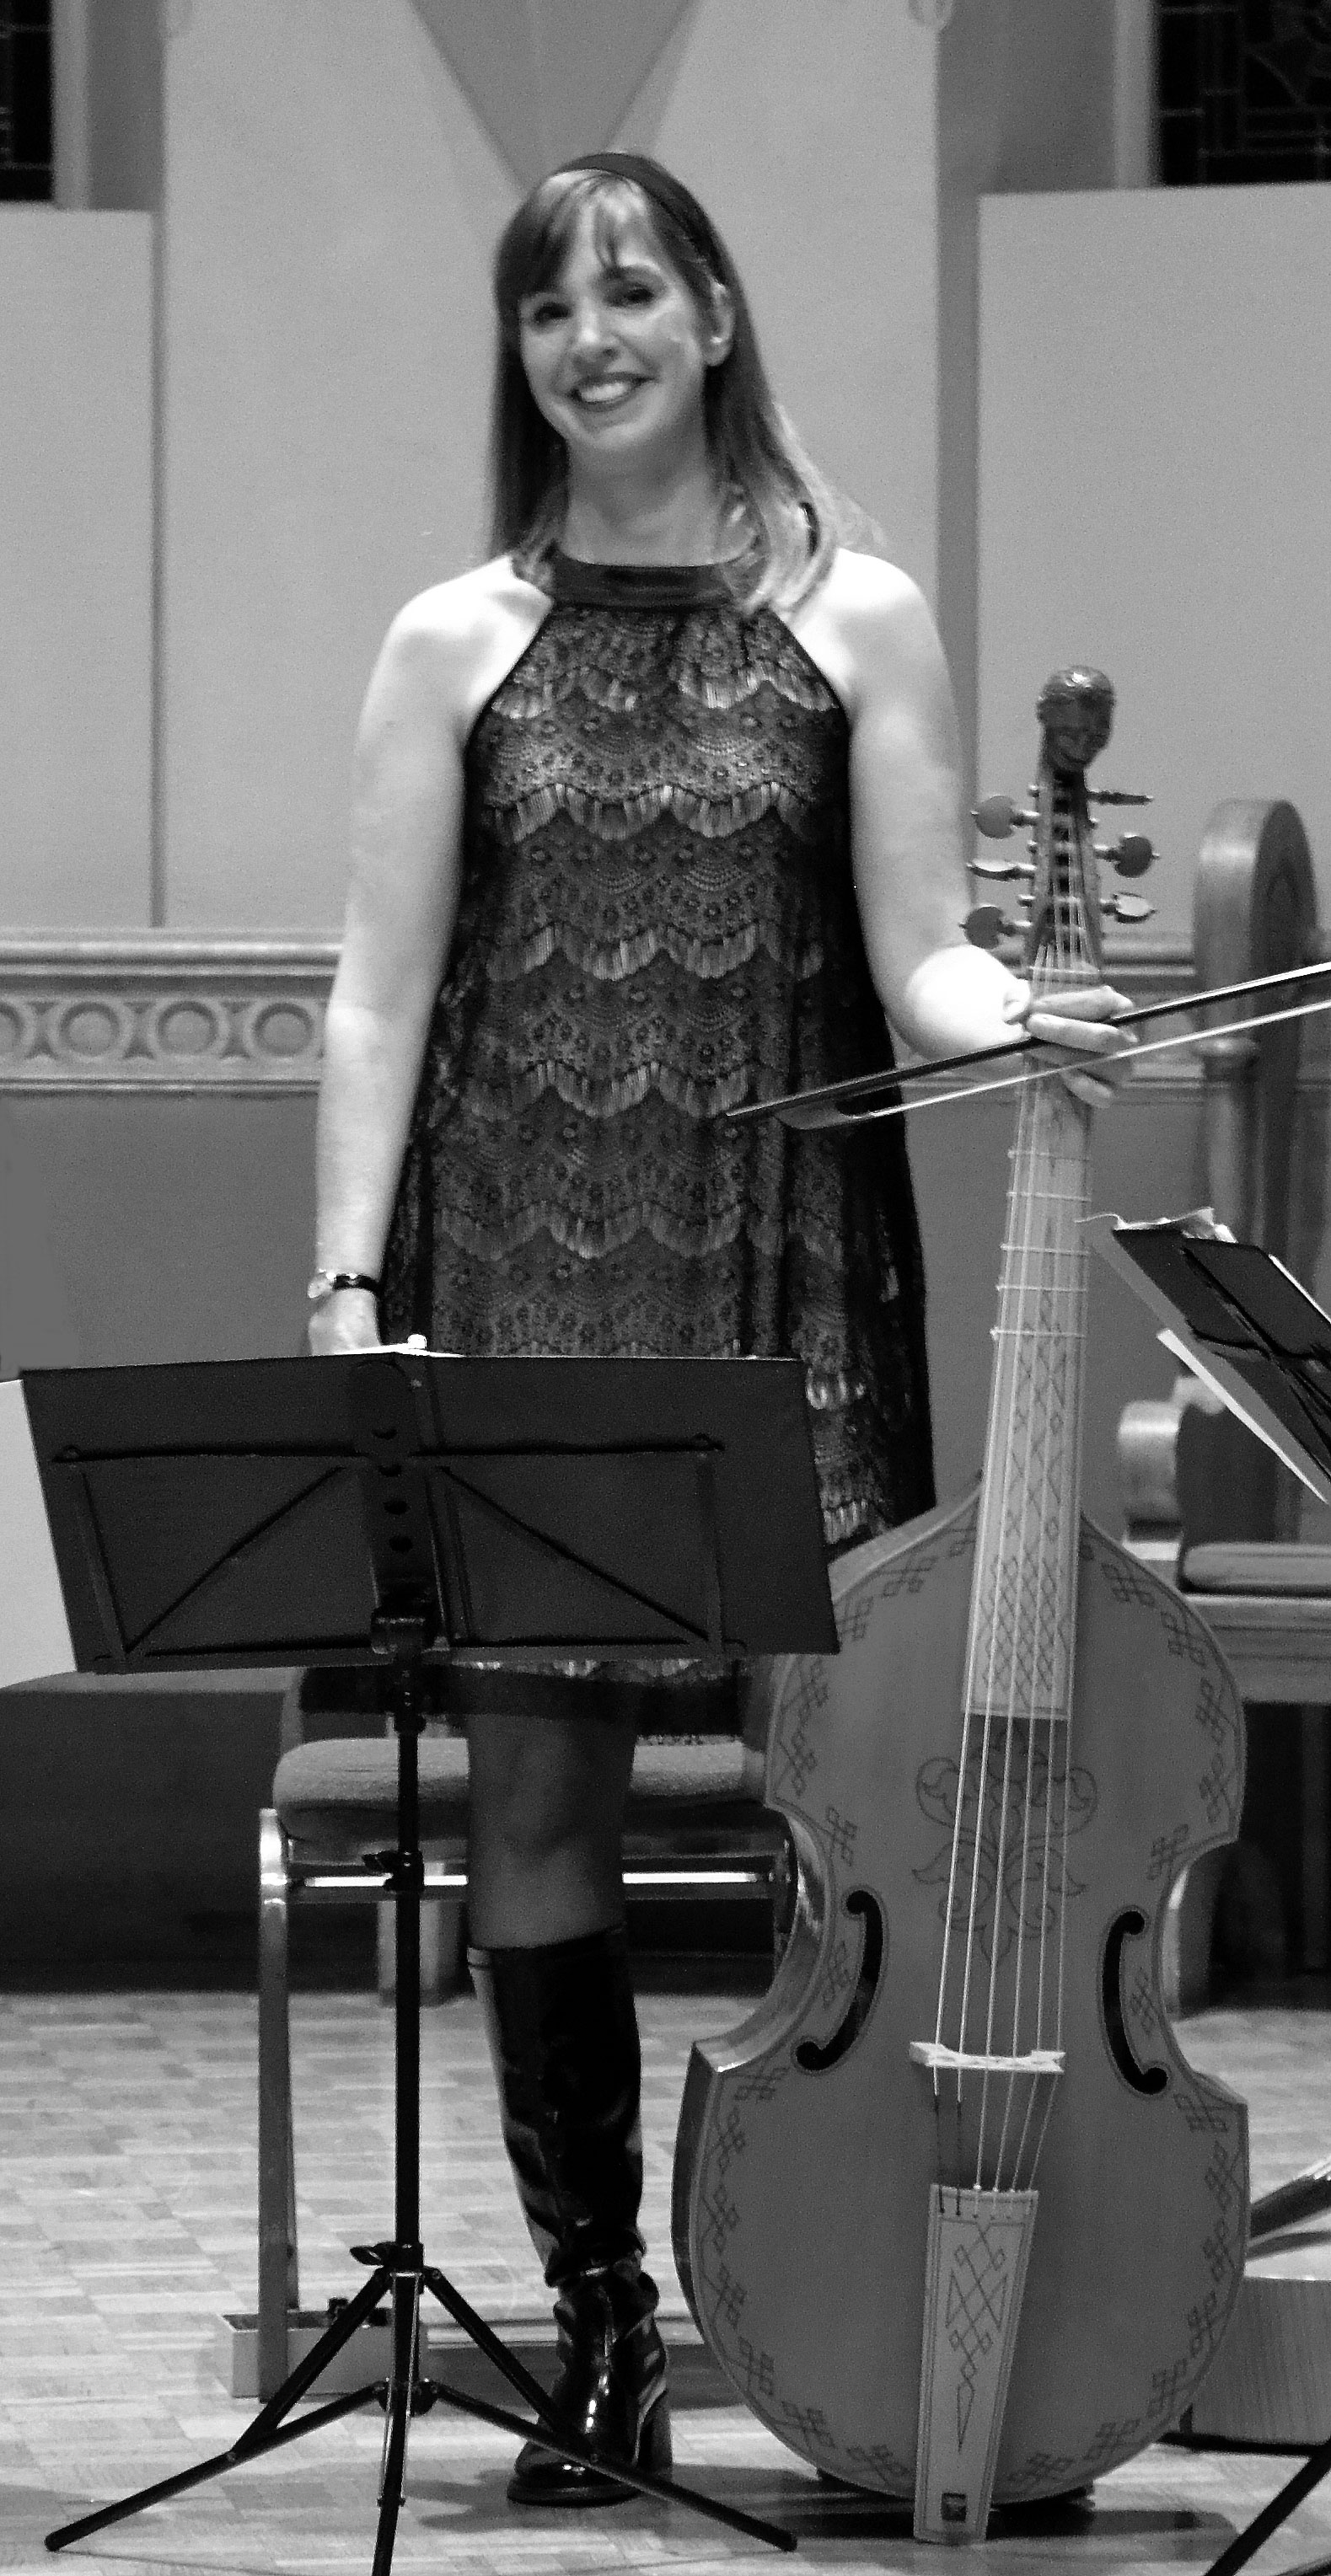 Joëlle with bass viol